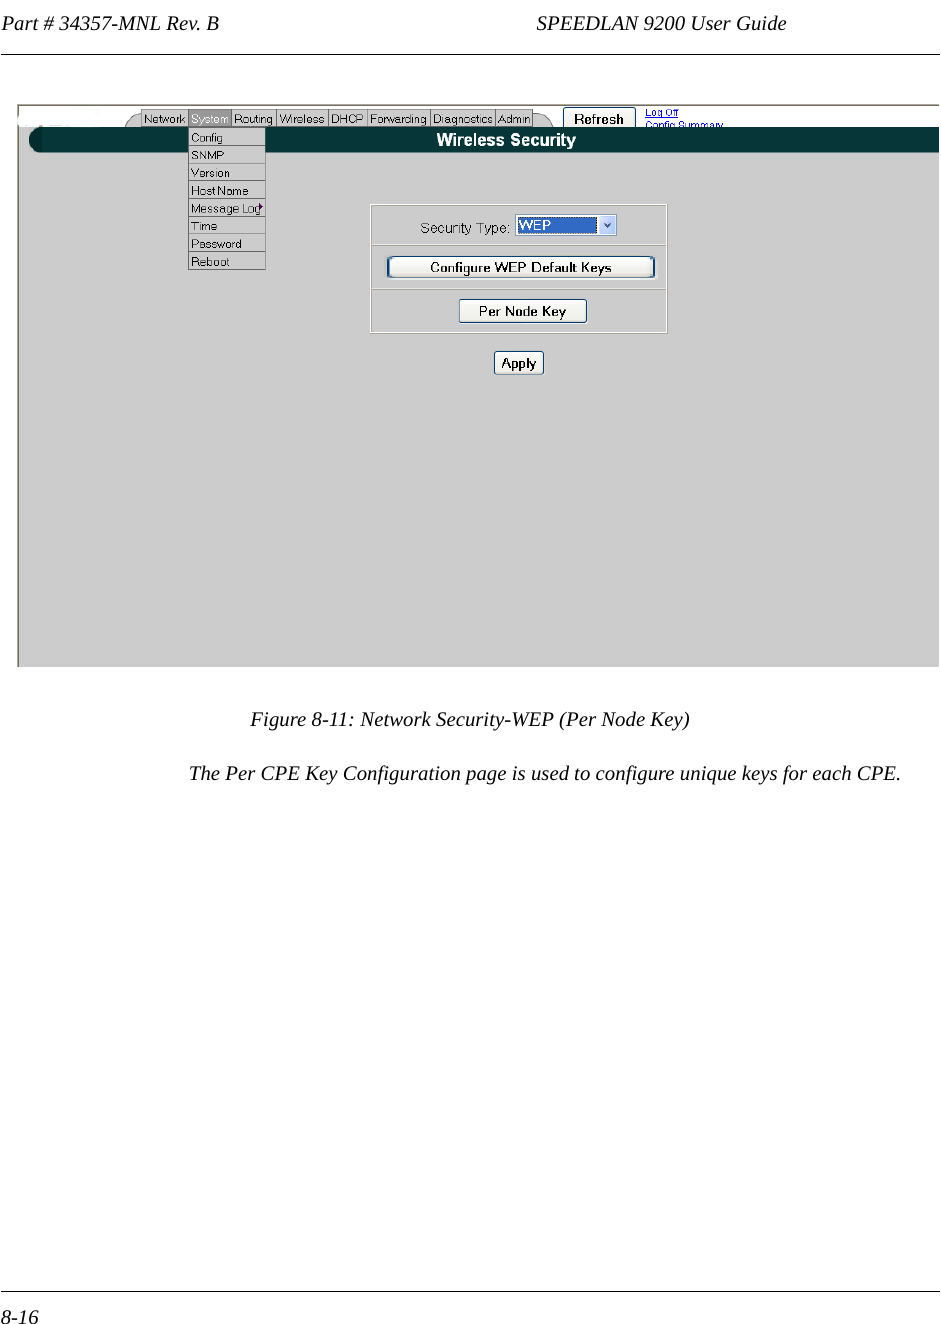 Part # 34357-MNL Rev. B                                                             SPEEDLAN 9200 User Guide 8-16Figure 8-11: Network Security-WEP (Per Node Key)The Per CPE Key Configuration page is used to configure unique keys for each CPE. 